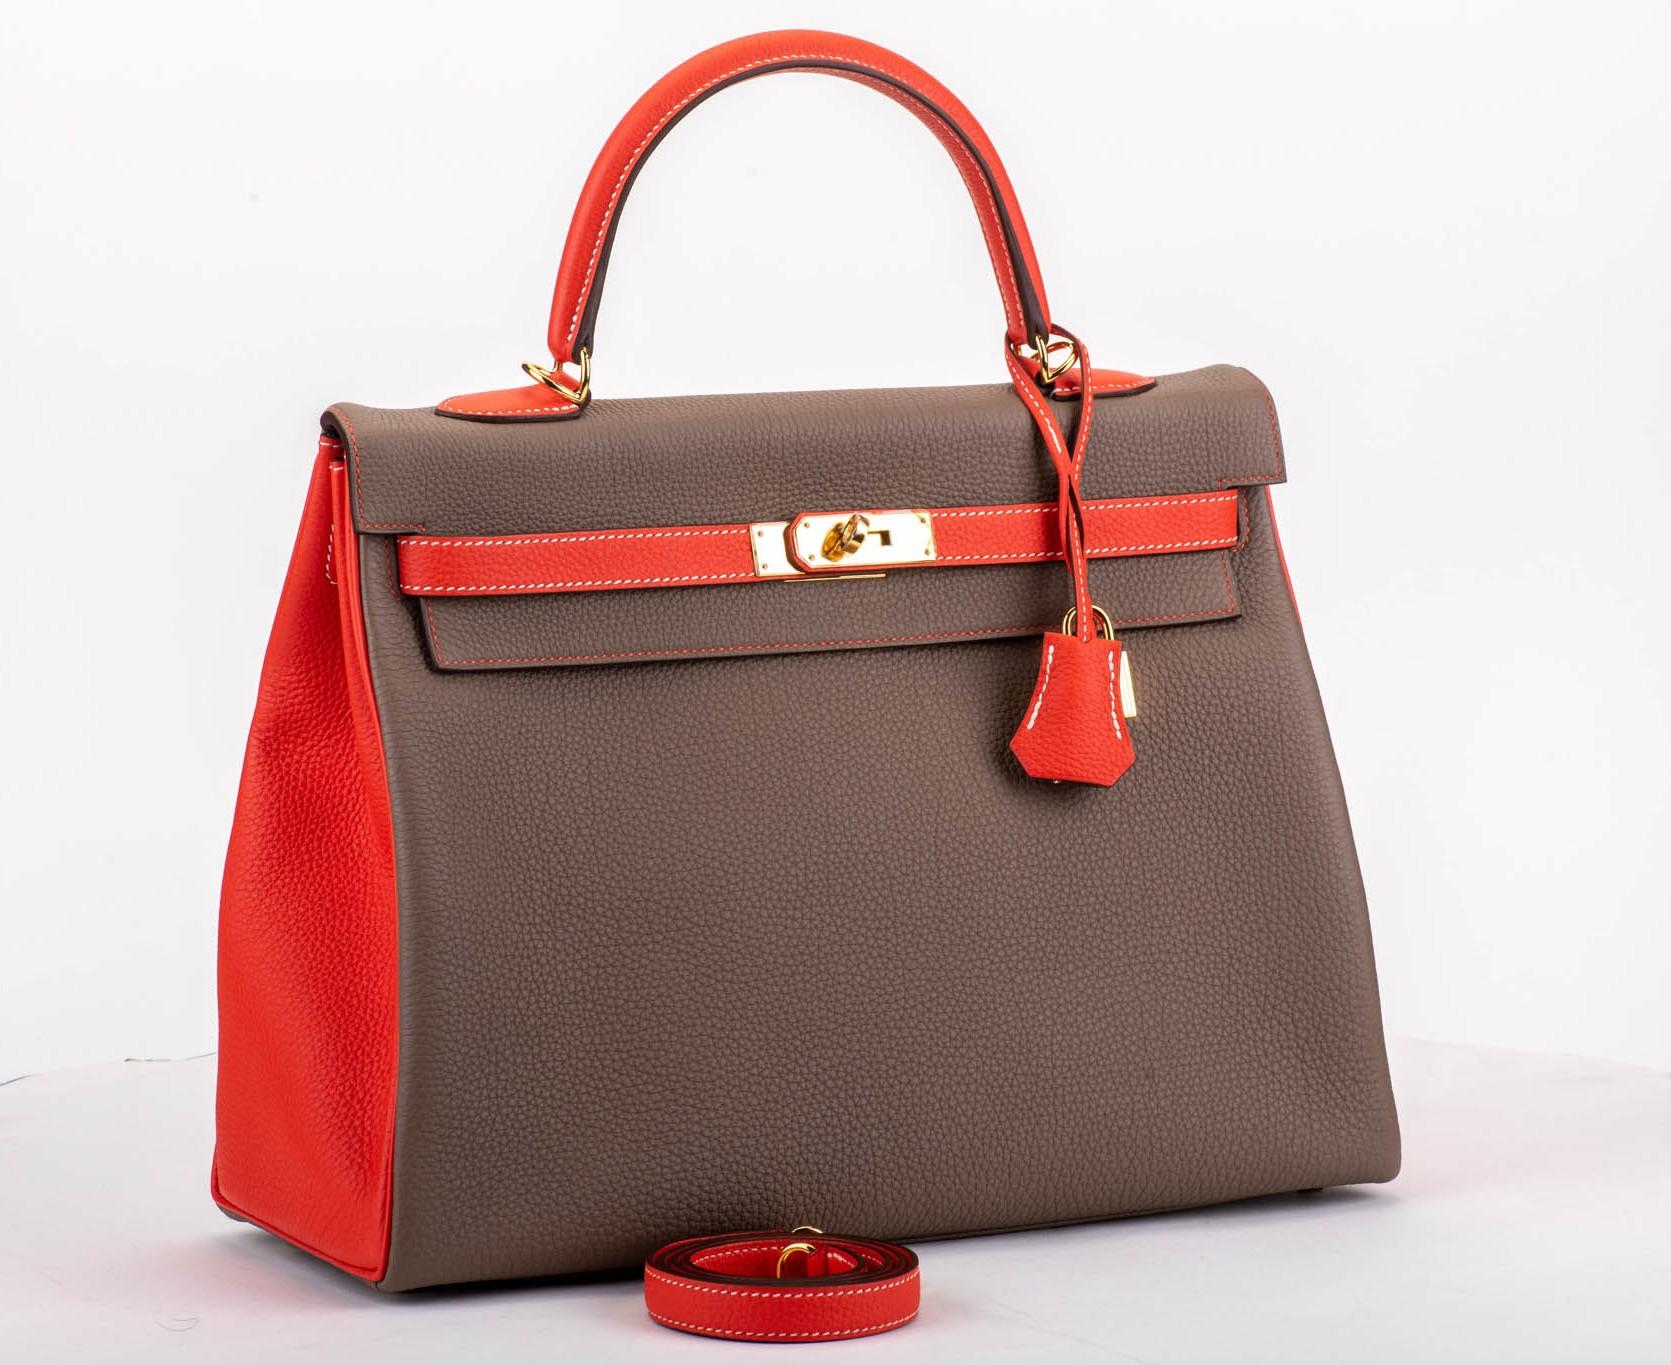 Hermès 35 cm Kelly horse shoe edition in etoupe and rouge pivoine togo leather, Gold tone hardware. Handle drop, 3.75